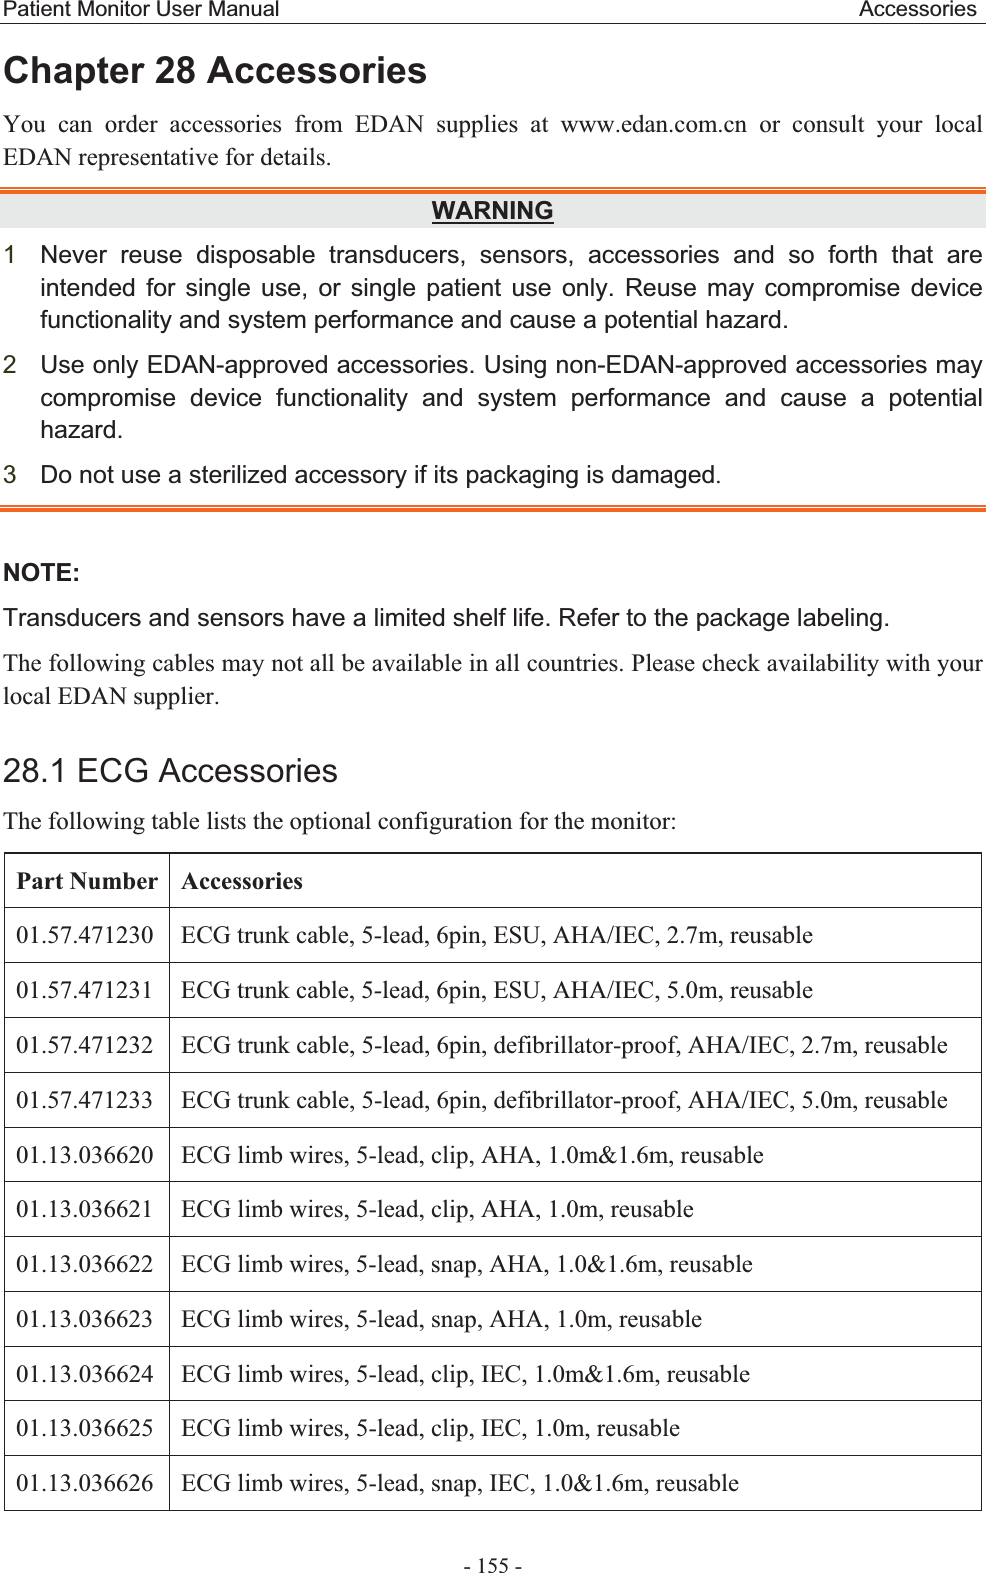 Patient Monitor User Manual                                                     Accessories  - 155 - Chapter 28 Accessories   You can order accessories from EDAN supplies at www.edan.com.cn or consult your local EDAN representative for details.   WARNING1Never reuse disposable transducers, sensors, accessories and so forth that are intended for single use, or single patient use only. Reuse may compromise device functionality and system performance and cause a potential hazard. 2Use only EDAN-approved accessories. Using non-EDAN-approved accessories may compromise device functionality and system performance and cause a potential hazard.  3Do not use a sterilized accessory if its packaging is damaged. NOTE:Transducers and sensors have a limited shelf life. Refer to the package labeling. The following cables may not all be available in all countries. Please check availability with your local EDAN supplier. 28.1 ECG Accessories The following table lists the optional configuration for the monitor:   Part Number  Accessories 01.57.471230  ECG trunk cable, 5-lead, 6pin, ESU, AHA/IEC, 2.7m, reusable 01.57.471231  ECG trunk cable, 5-lead, 6pin, ESU, AHA/IEC, 5.0m, reusable 01.57.471232  ECG trunk cable, 5-lead, 6pin, defibrillator-proof, AHA/IEC, 2.7m, reusable 01.57.471233  ECG trunk cable, 5-lead, 6pin, defibrillator-proof, AHA/IEC, 5.0m, reusable 01.13.036620  ECG limb wires, 5-lead, clip, AHA, 1.0m&amp;1.6m, reusable 01.13.036621  ECG limb wires, 5-lead, clip, AHA, 1.0m, reusable 01.13.036622  ECG limb wires, 5-lead, snap, AHA, 1.0&amp;1.6m, reusable 01.13.036623  ECG limb wires, 5-lead, snap, AHA, 1.0m, reusable 01.13.036624  ECG limb wires, 5-lead, clip, IEC, 1.0m&amp;1.6m, reusable 01.13.036625  ECG limb wires, 5-lead, clip, IEC, 1.0m, reusable 01.13.036626  ECG limb wires, 5-lead, snap, IEC, 1.0&amp;1.6m, reusable 